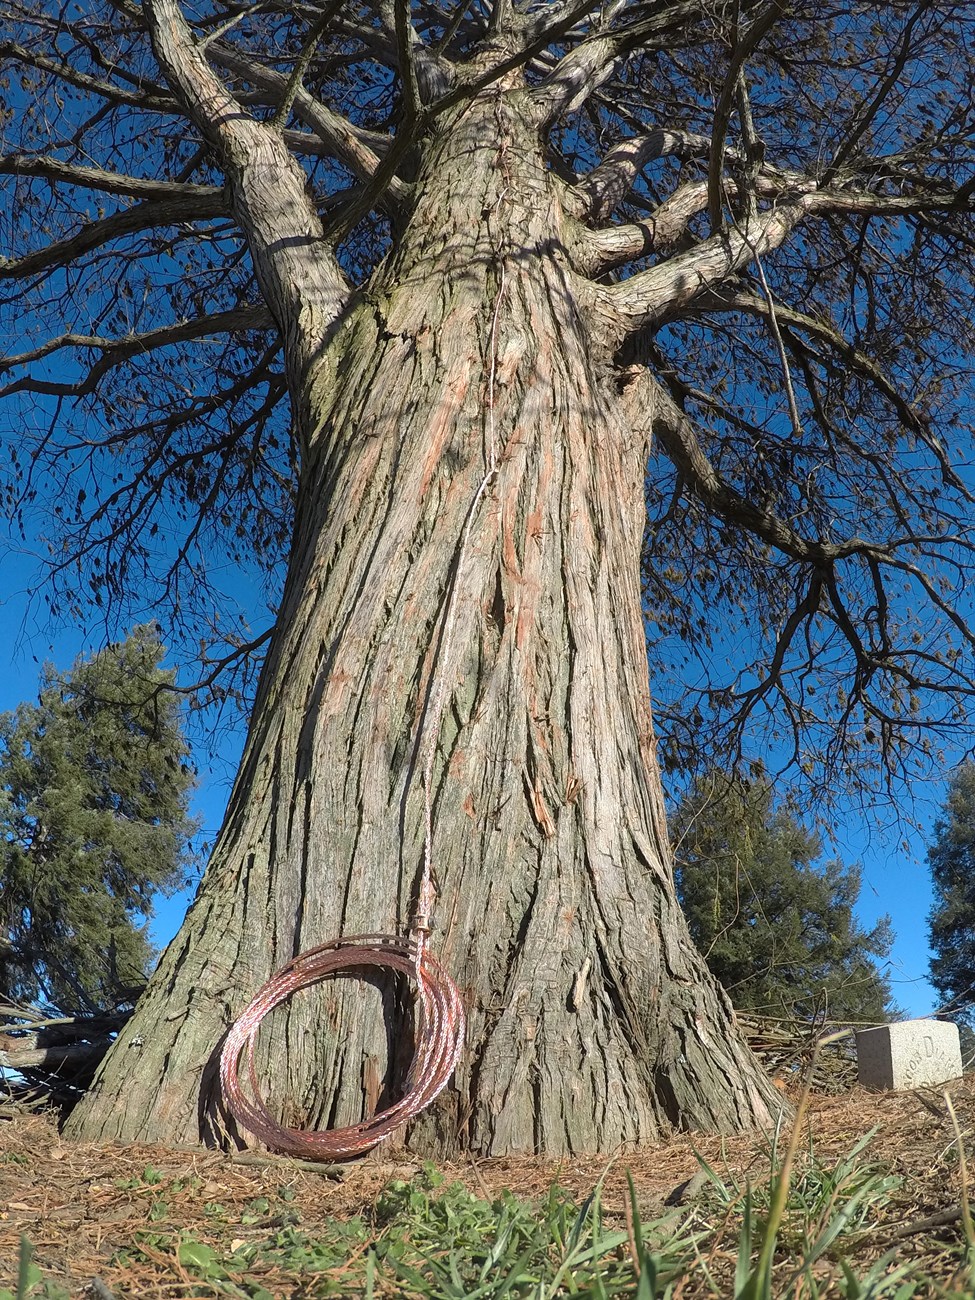 A cable is attached to the trunk of a tall tree from the top to the base of the trunk, where it is coiled.